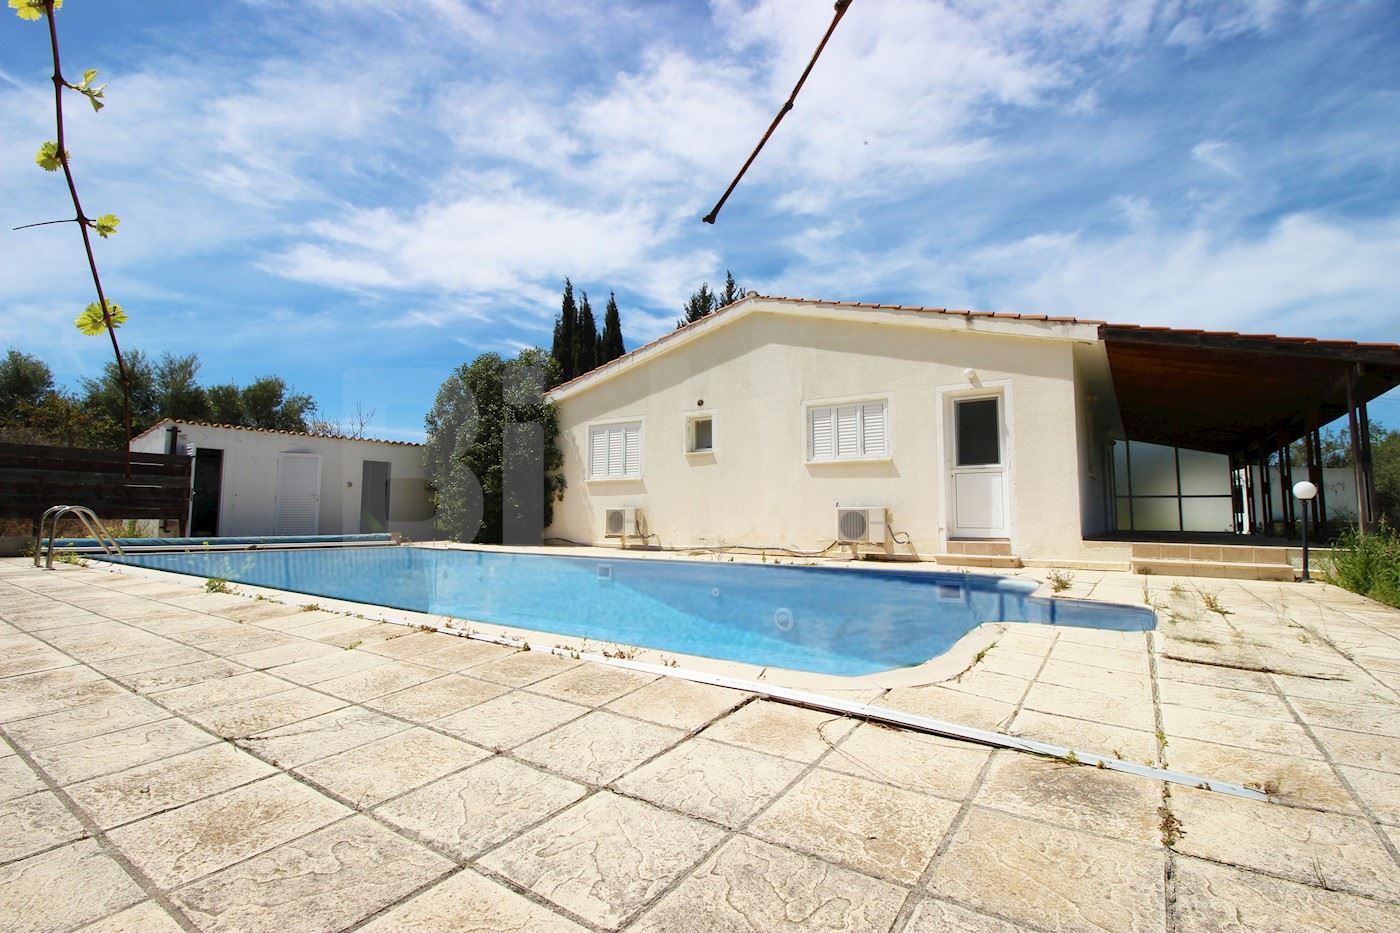 Detached house in Pano Akourdaleia, Paphos 1/13